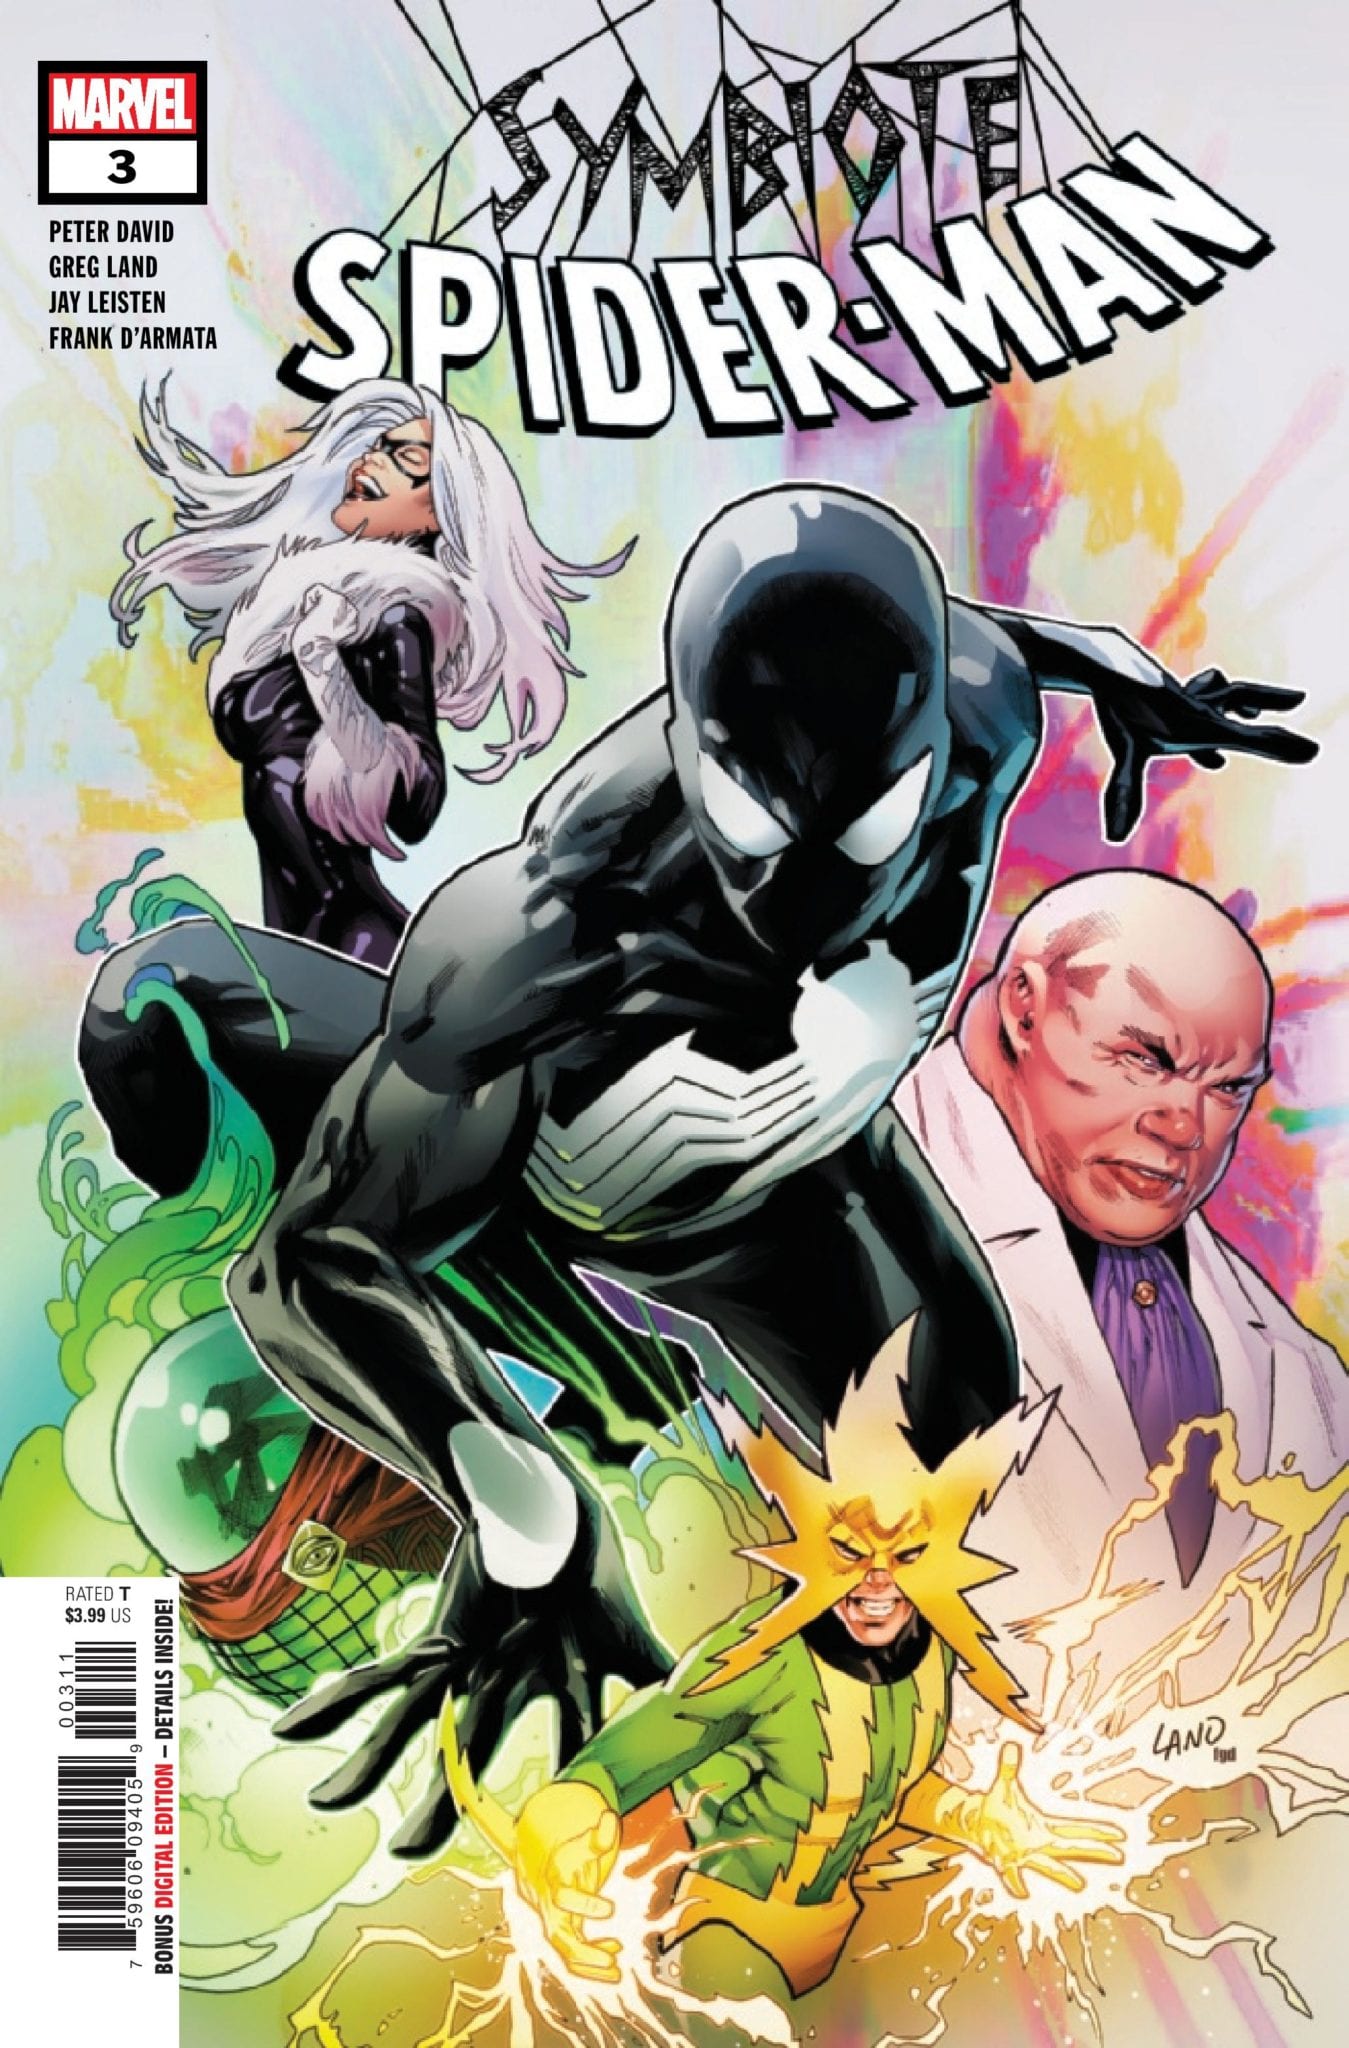 Marvel Comics Exclusive Preview: SYMBIOTE SPIDER-MAN #3 (OF 5)